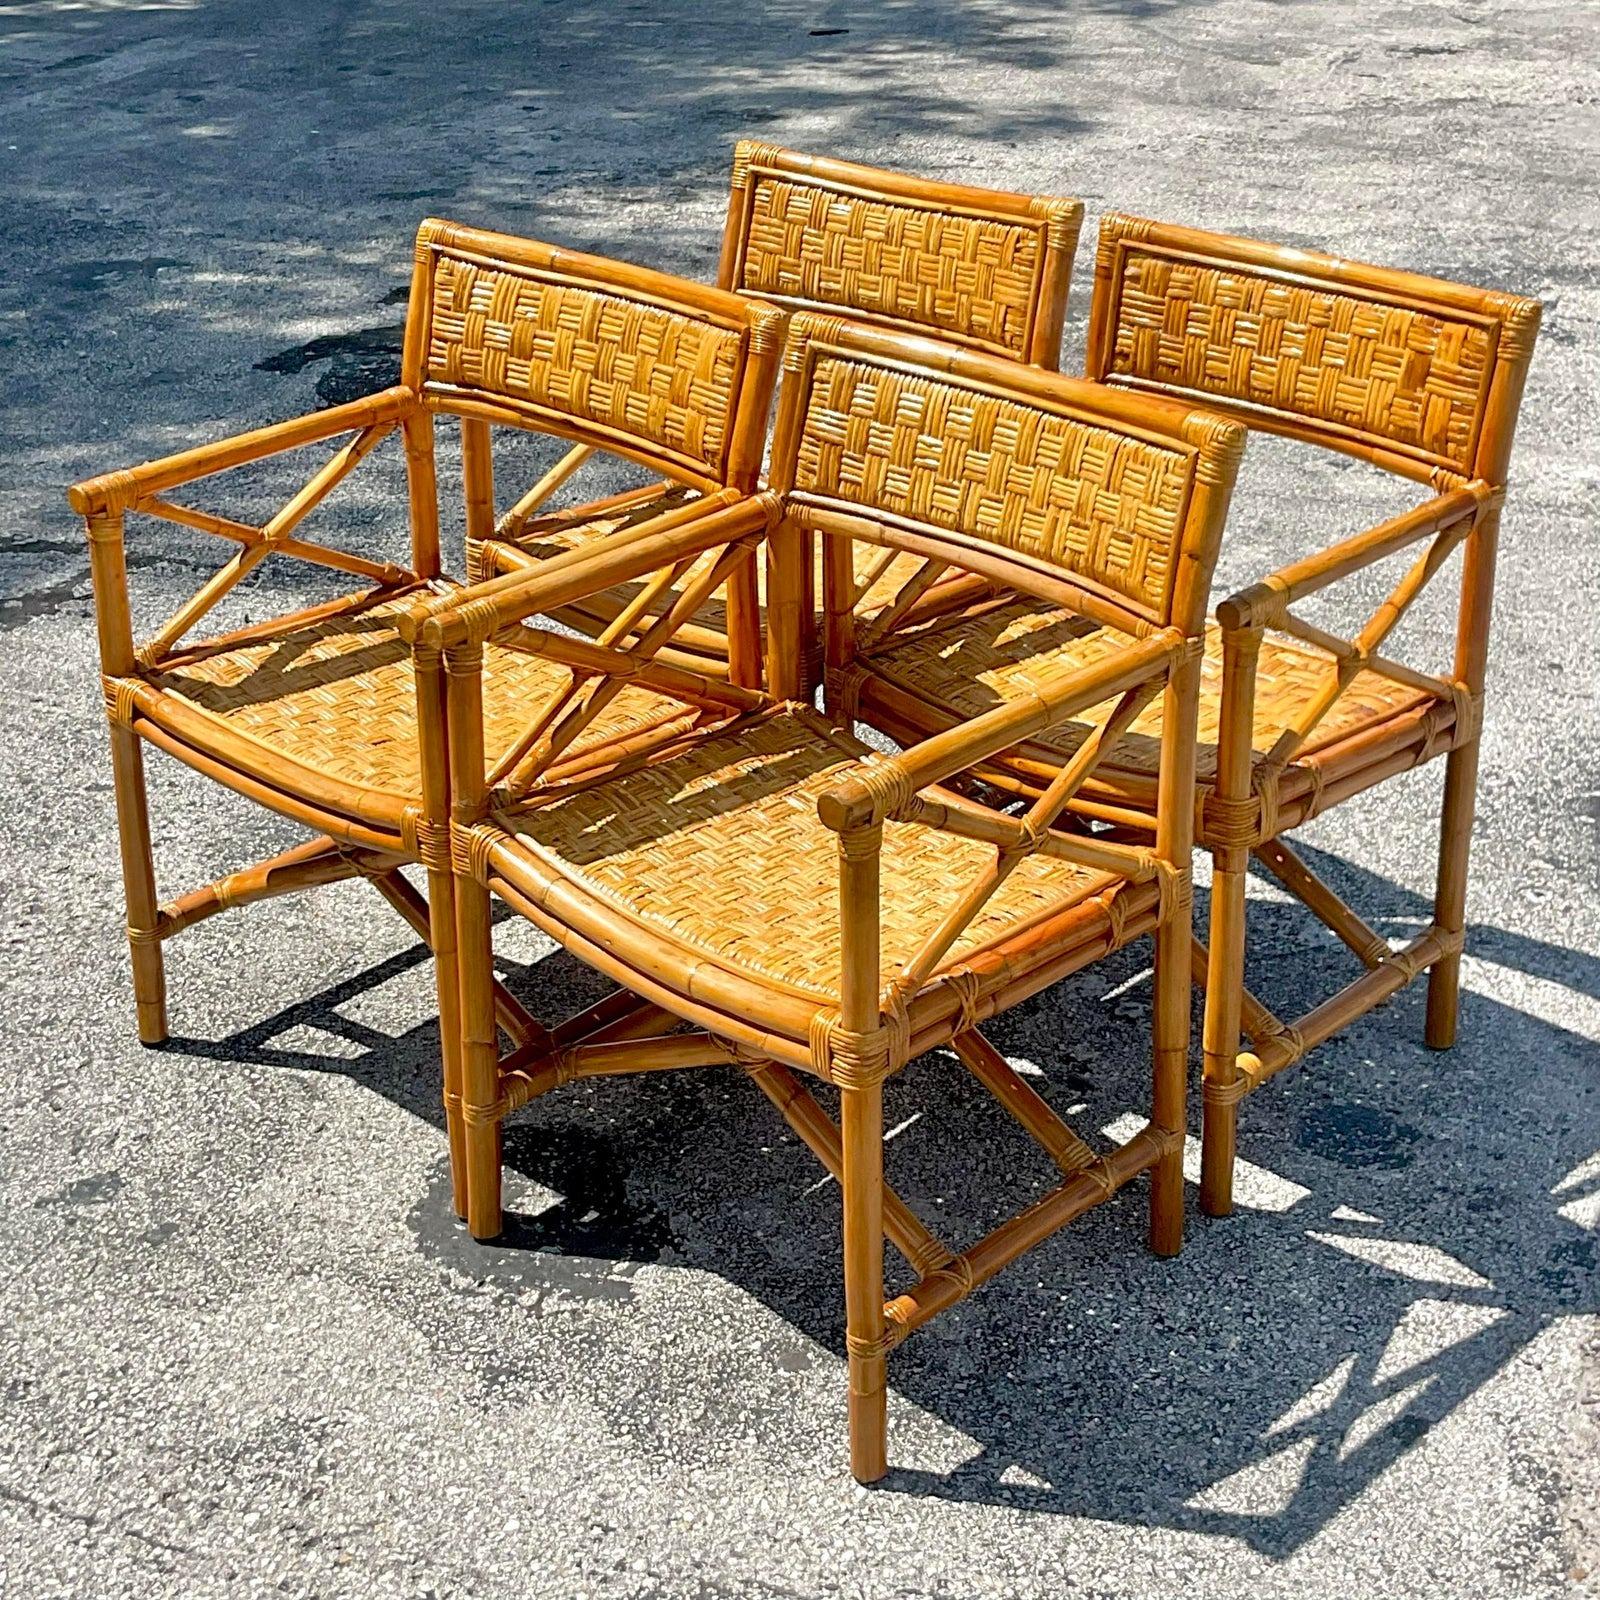 Vintage Coastal Woven Rattan Directors Chairs - Set of 4 For Sale 2